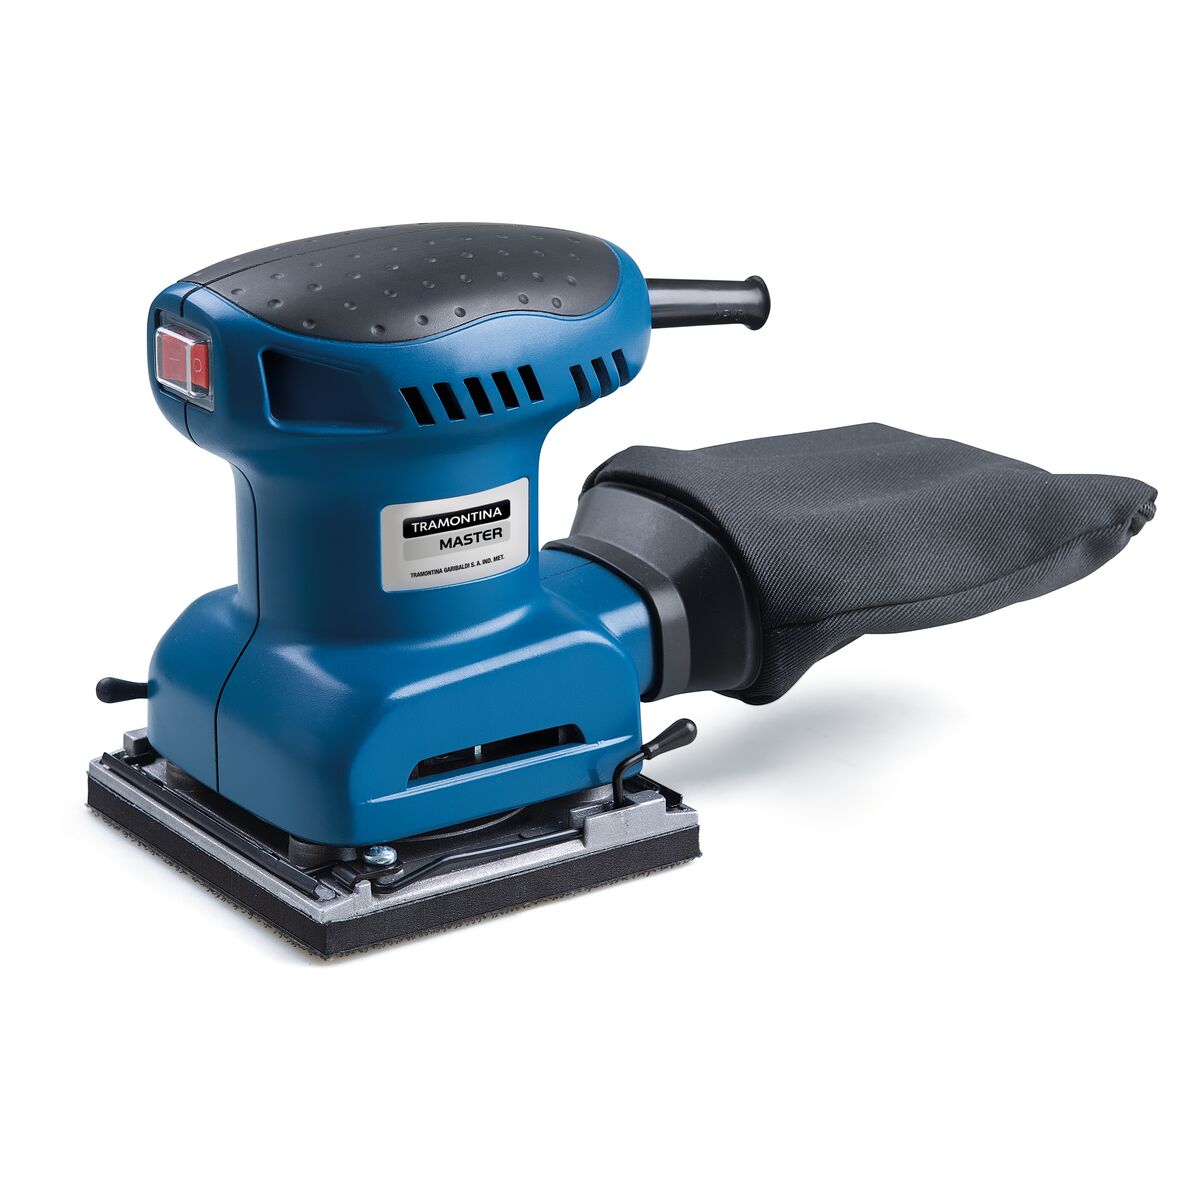 Tramontina MASTER  210 W 220 V electric sander for professional use with dust collector system